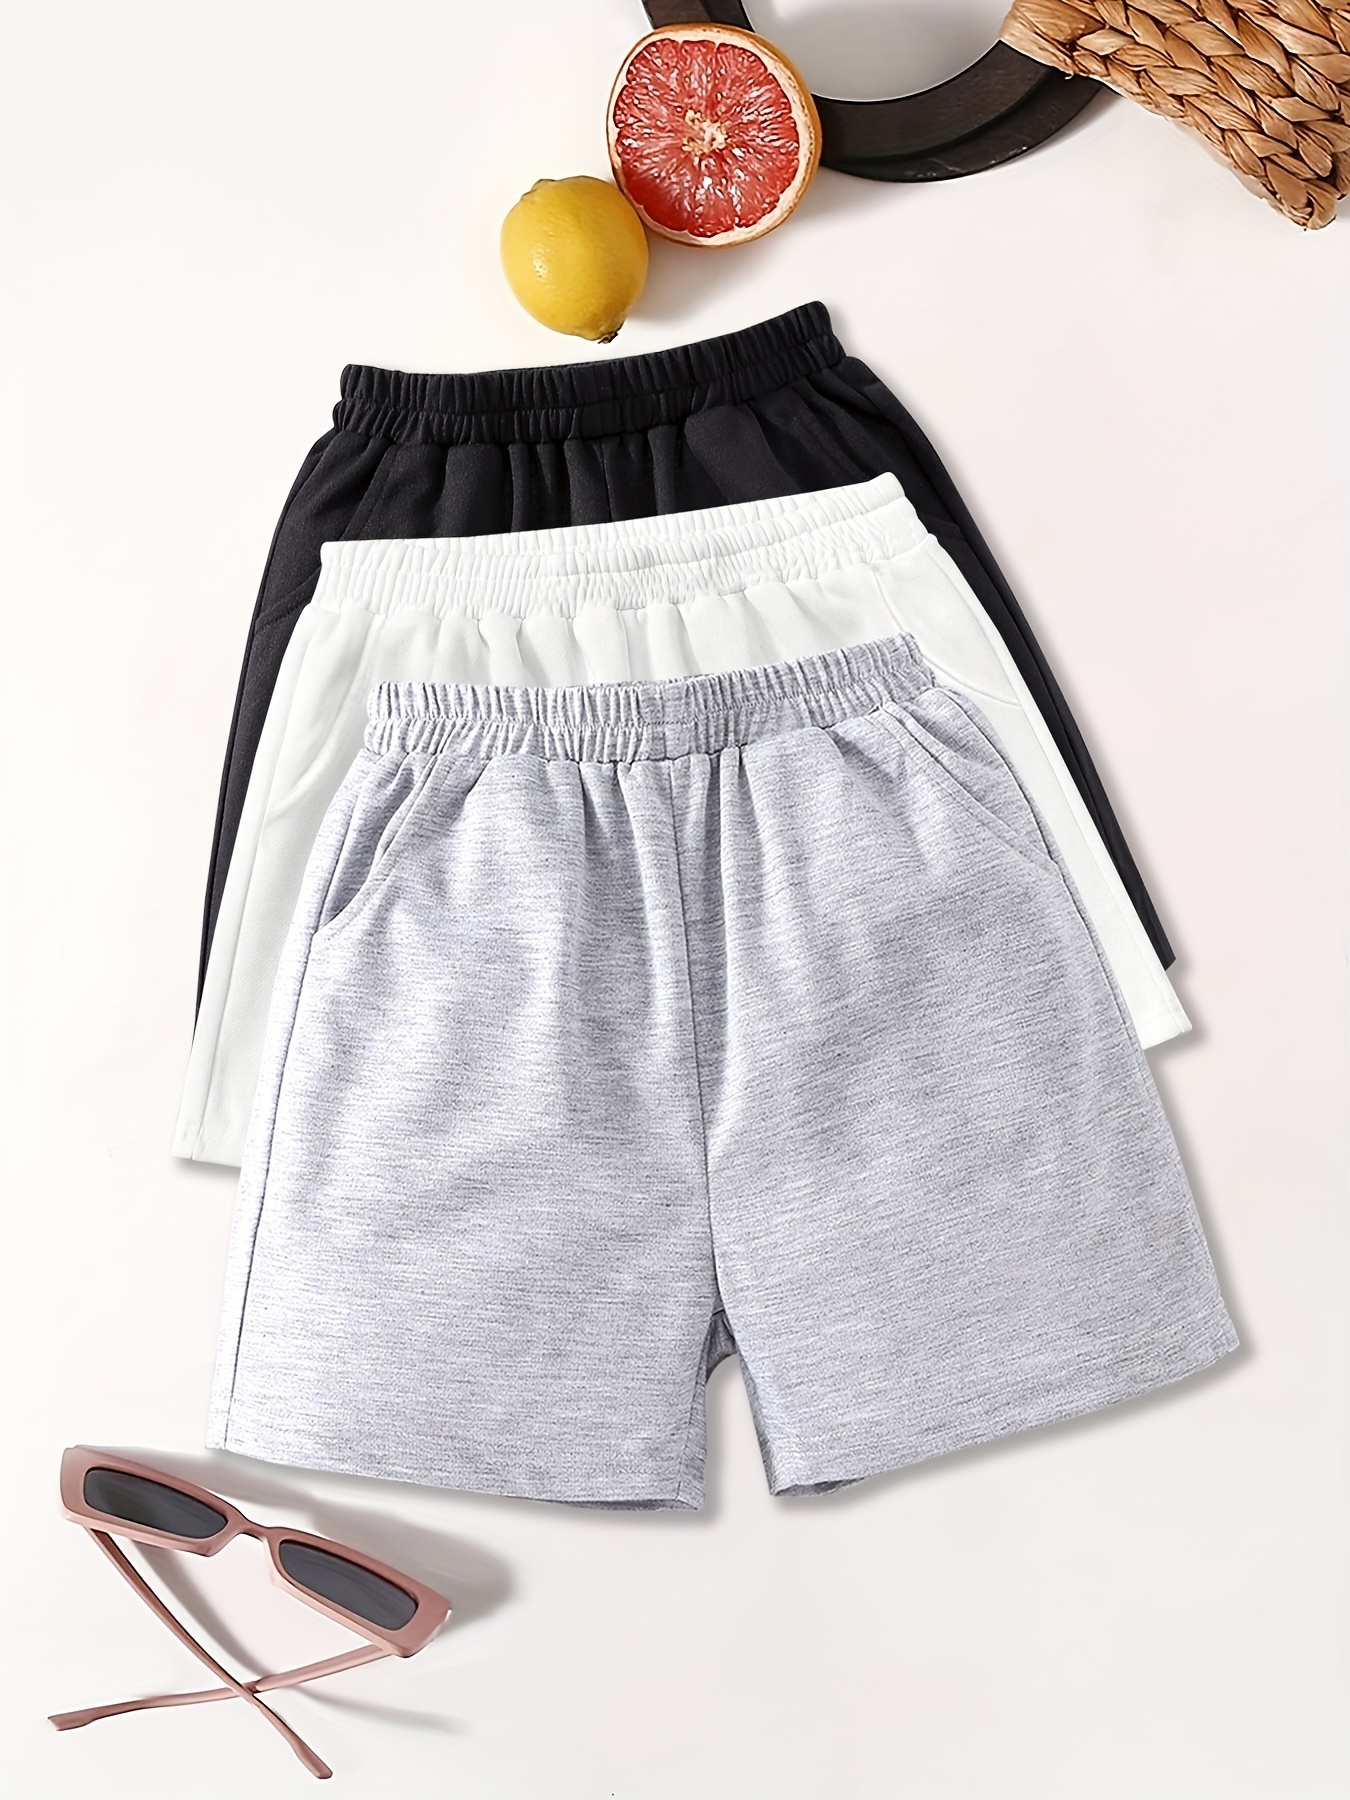 Women's Casual Summer Sweat Shorts Athletic Gym Shorts Loose Hiking Running  Knee Length Jogger Shorts with Pockets Womens Clothes